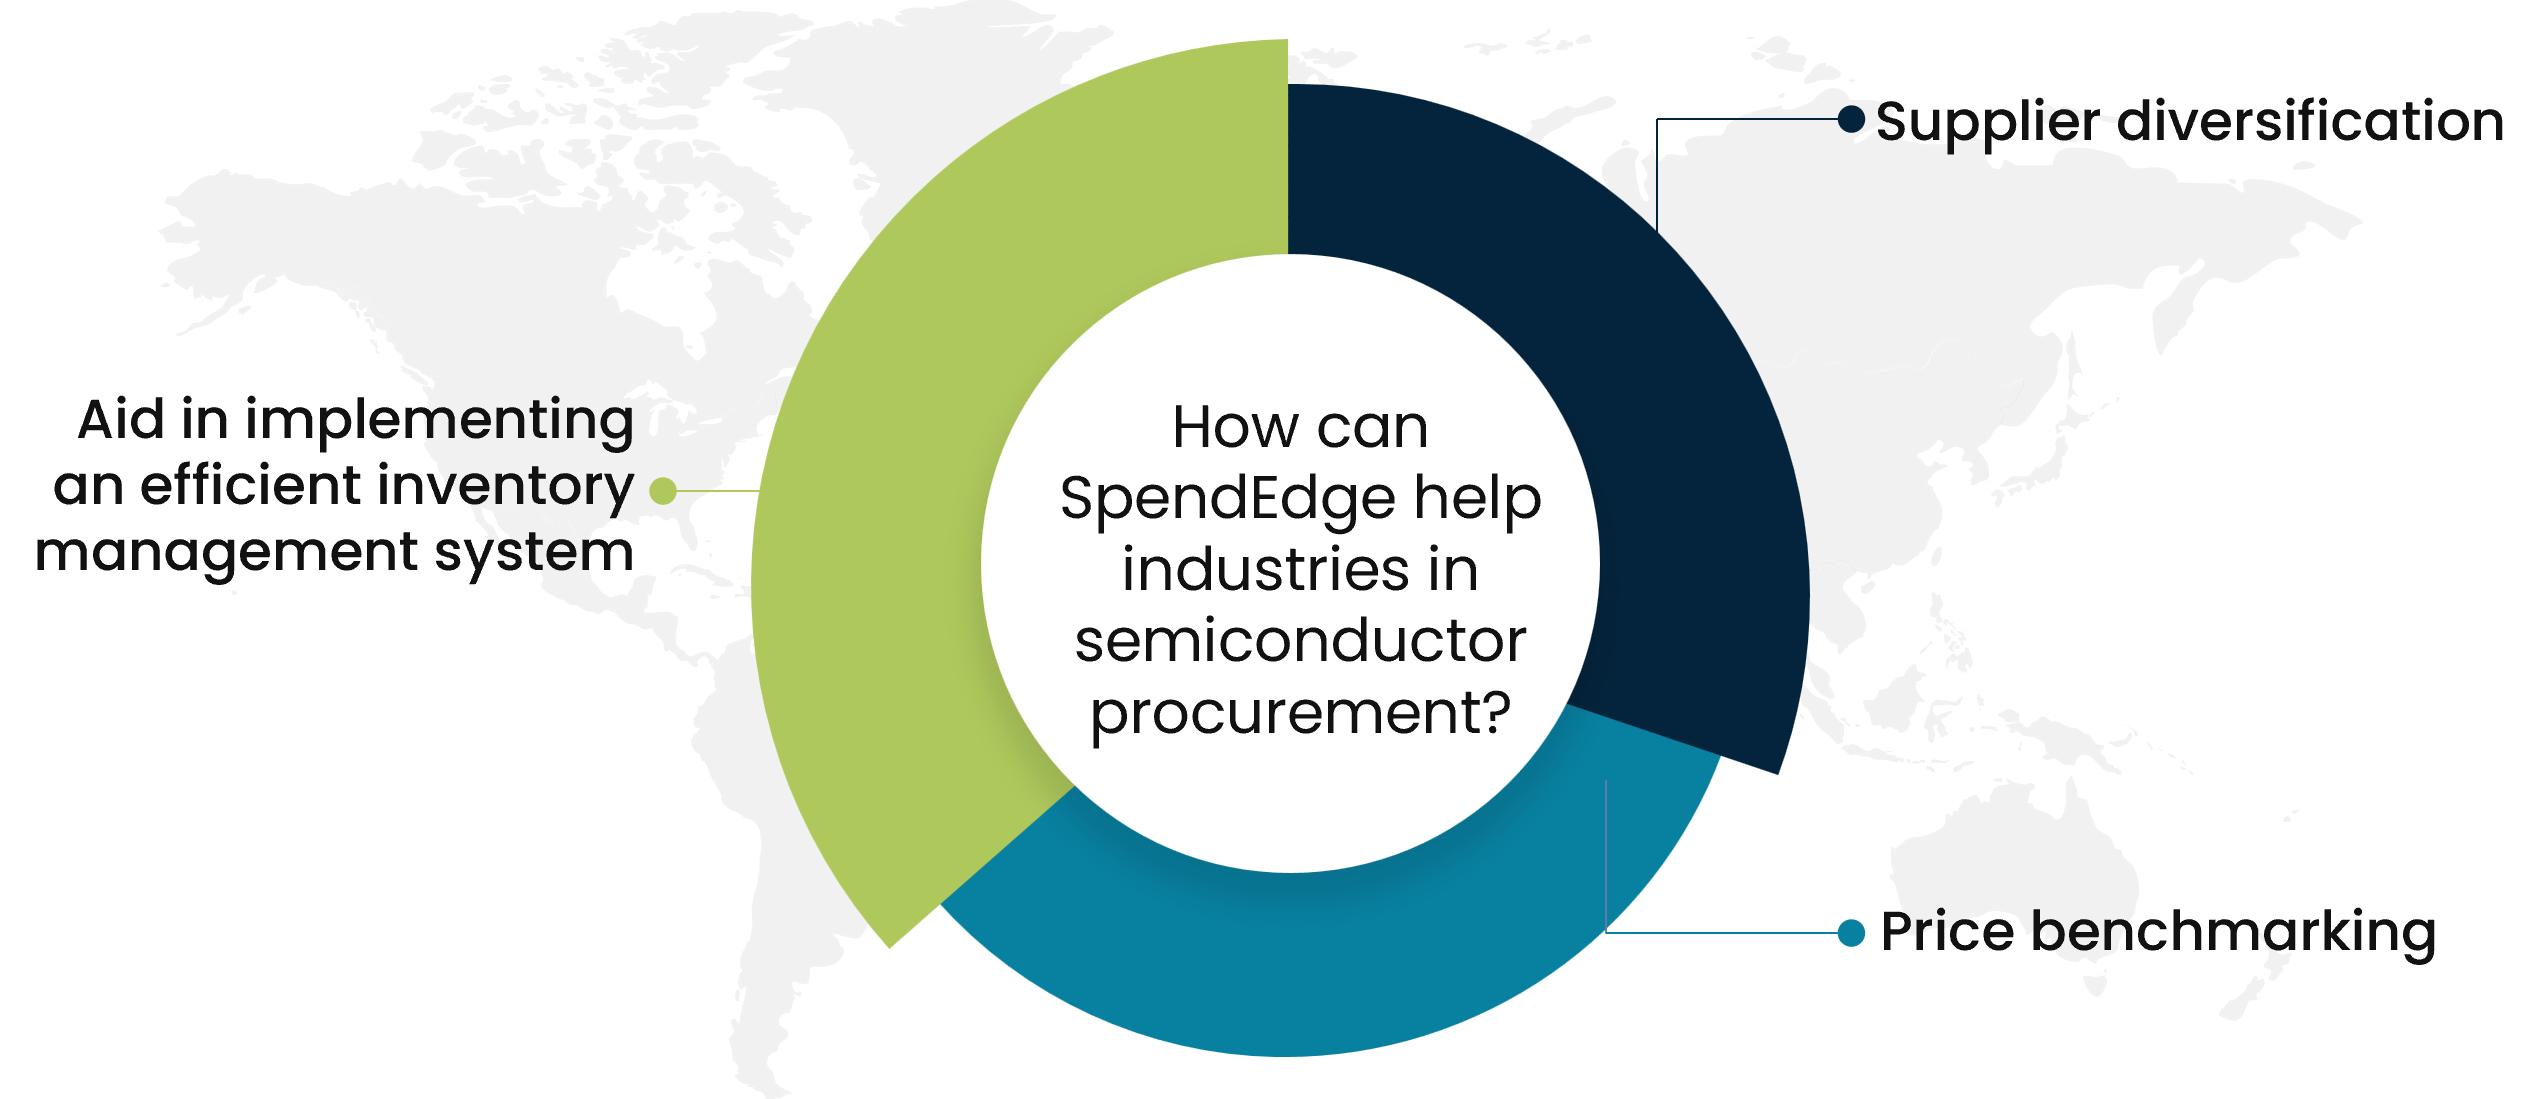 How can SpendEdge help industries in semiconductor procurement